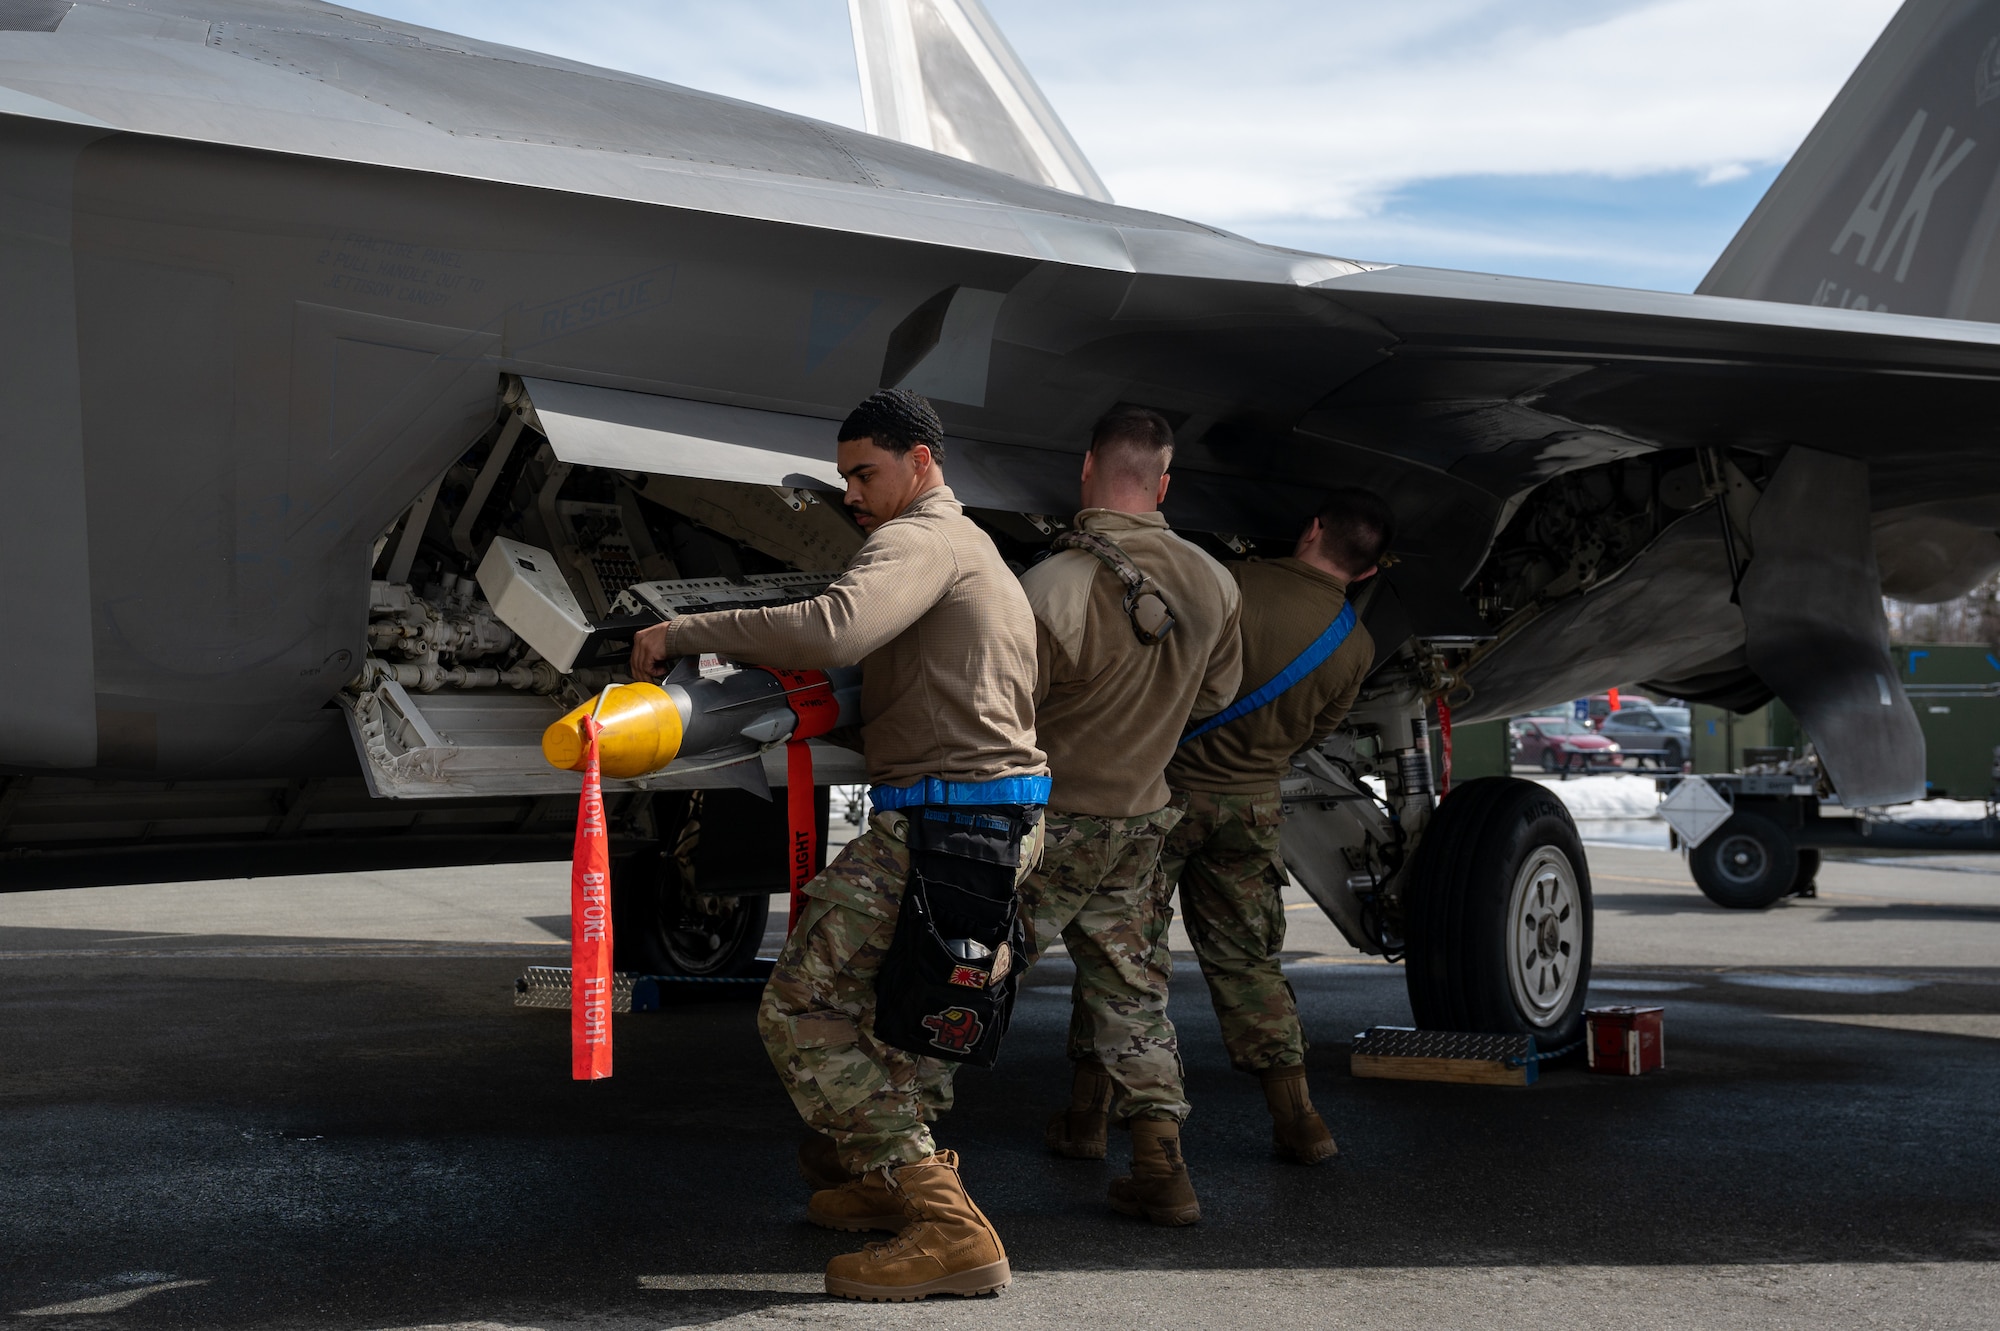 A photo of Airmen loading a missile onto a F-22